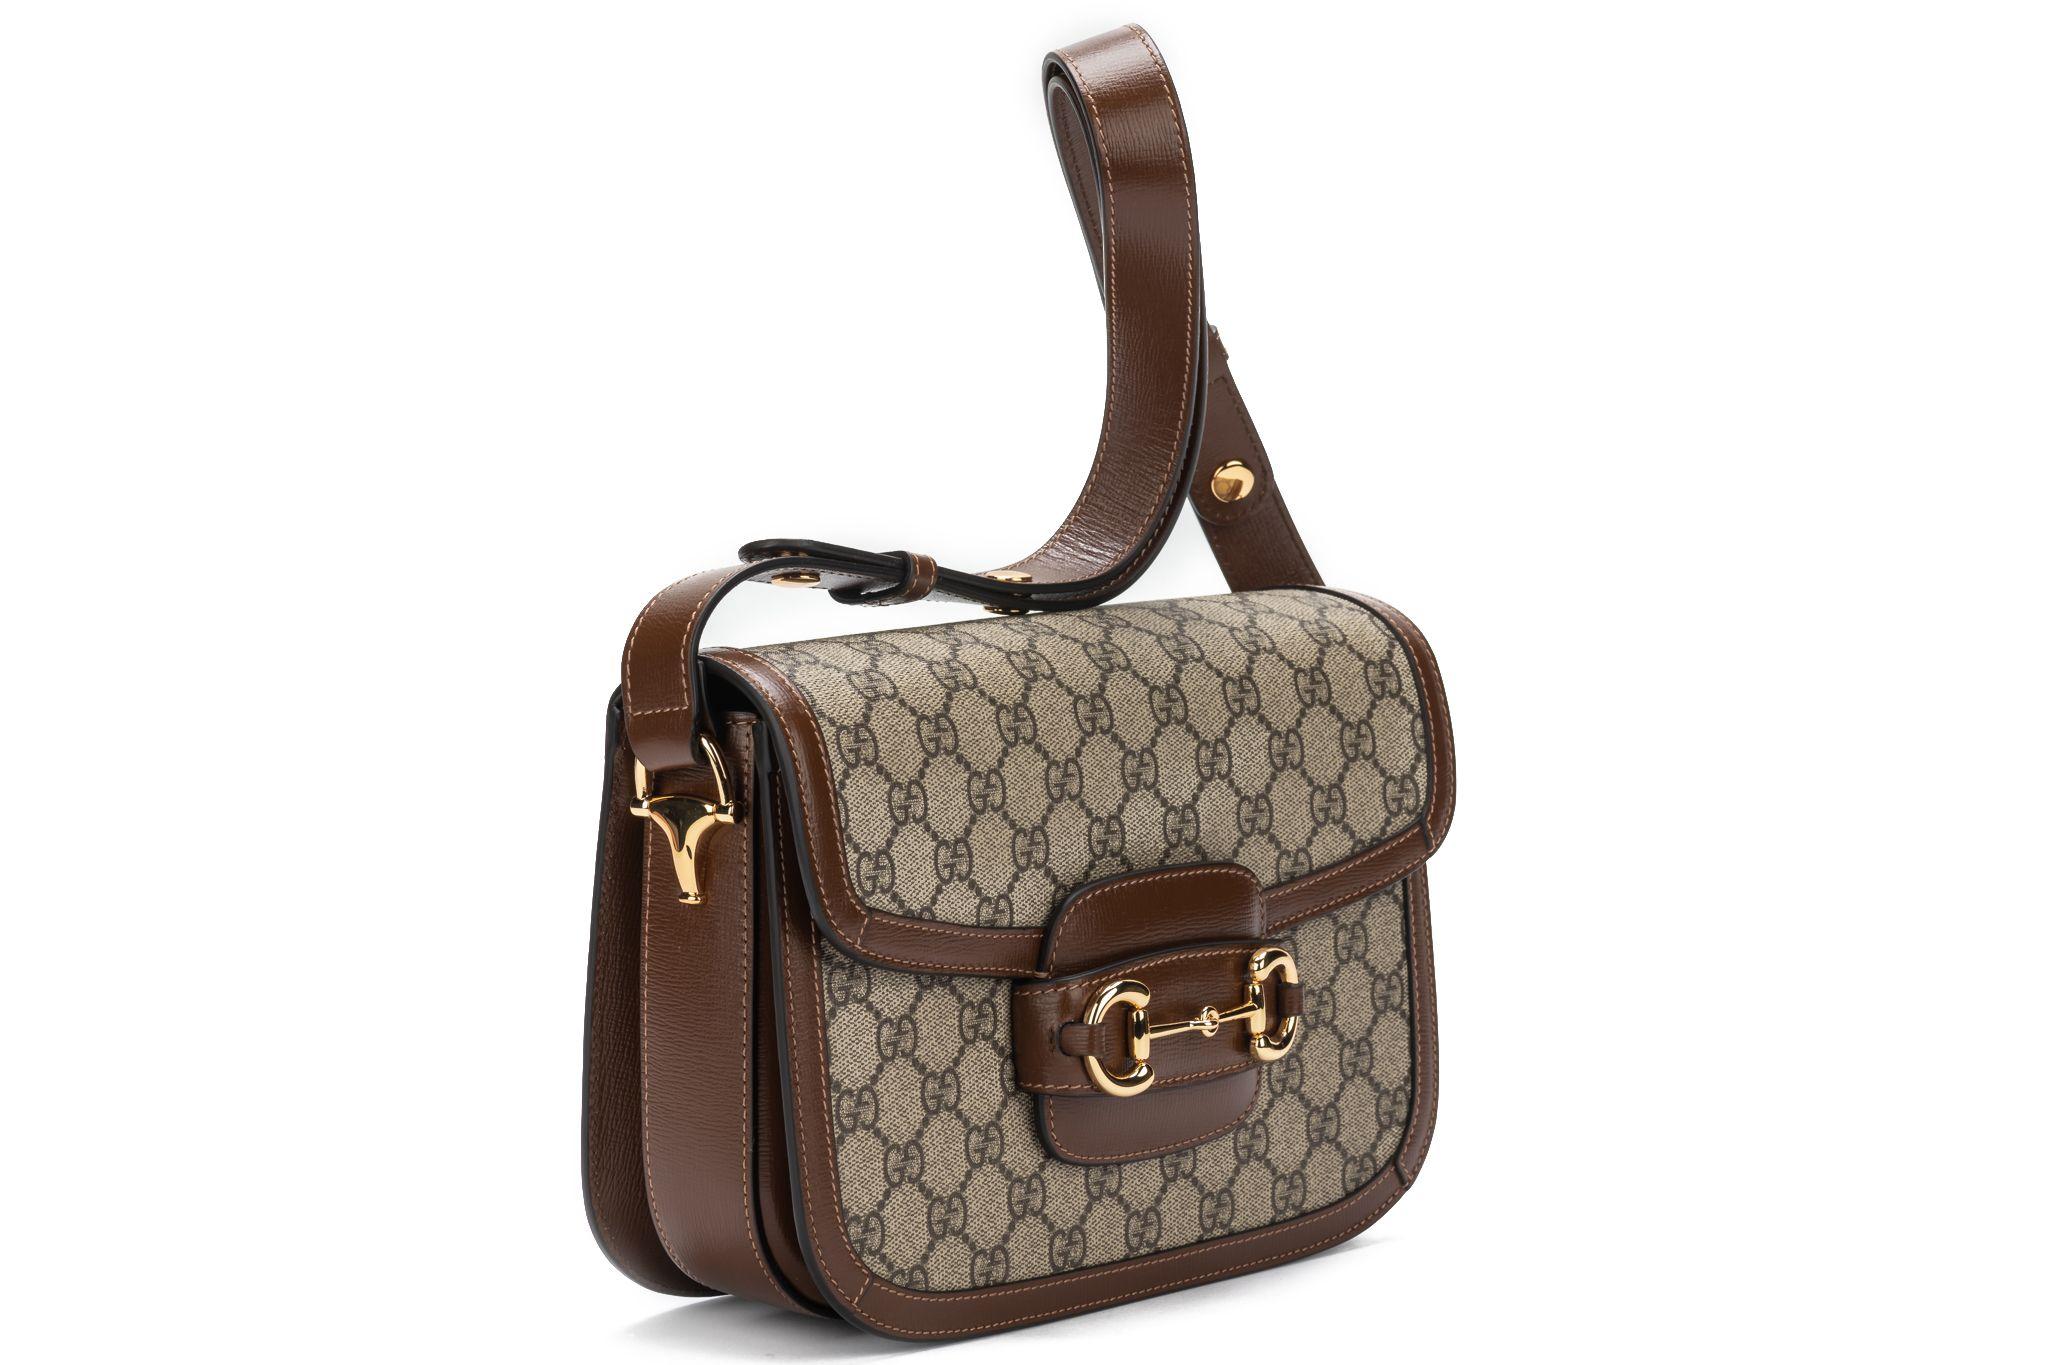 GUCCI Horsebit 1955 Shoulder Bag. The bag is new and comes with an adjustable shoulder strap which measures 9 inches. The item comes also with the booklet and original dustcover. Store price $2890.